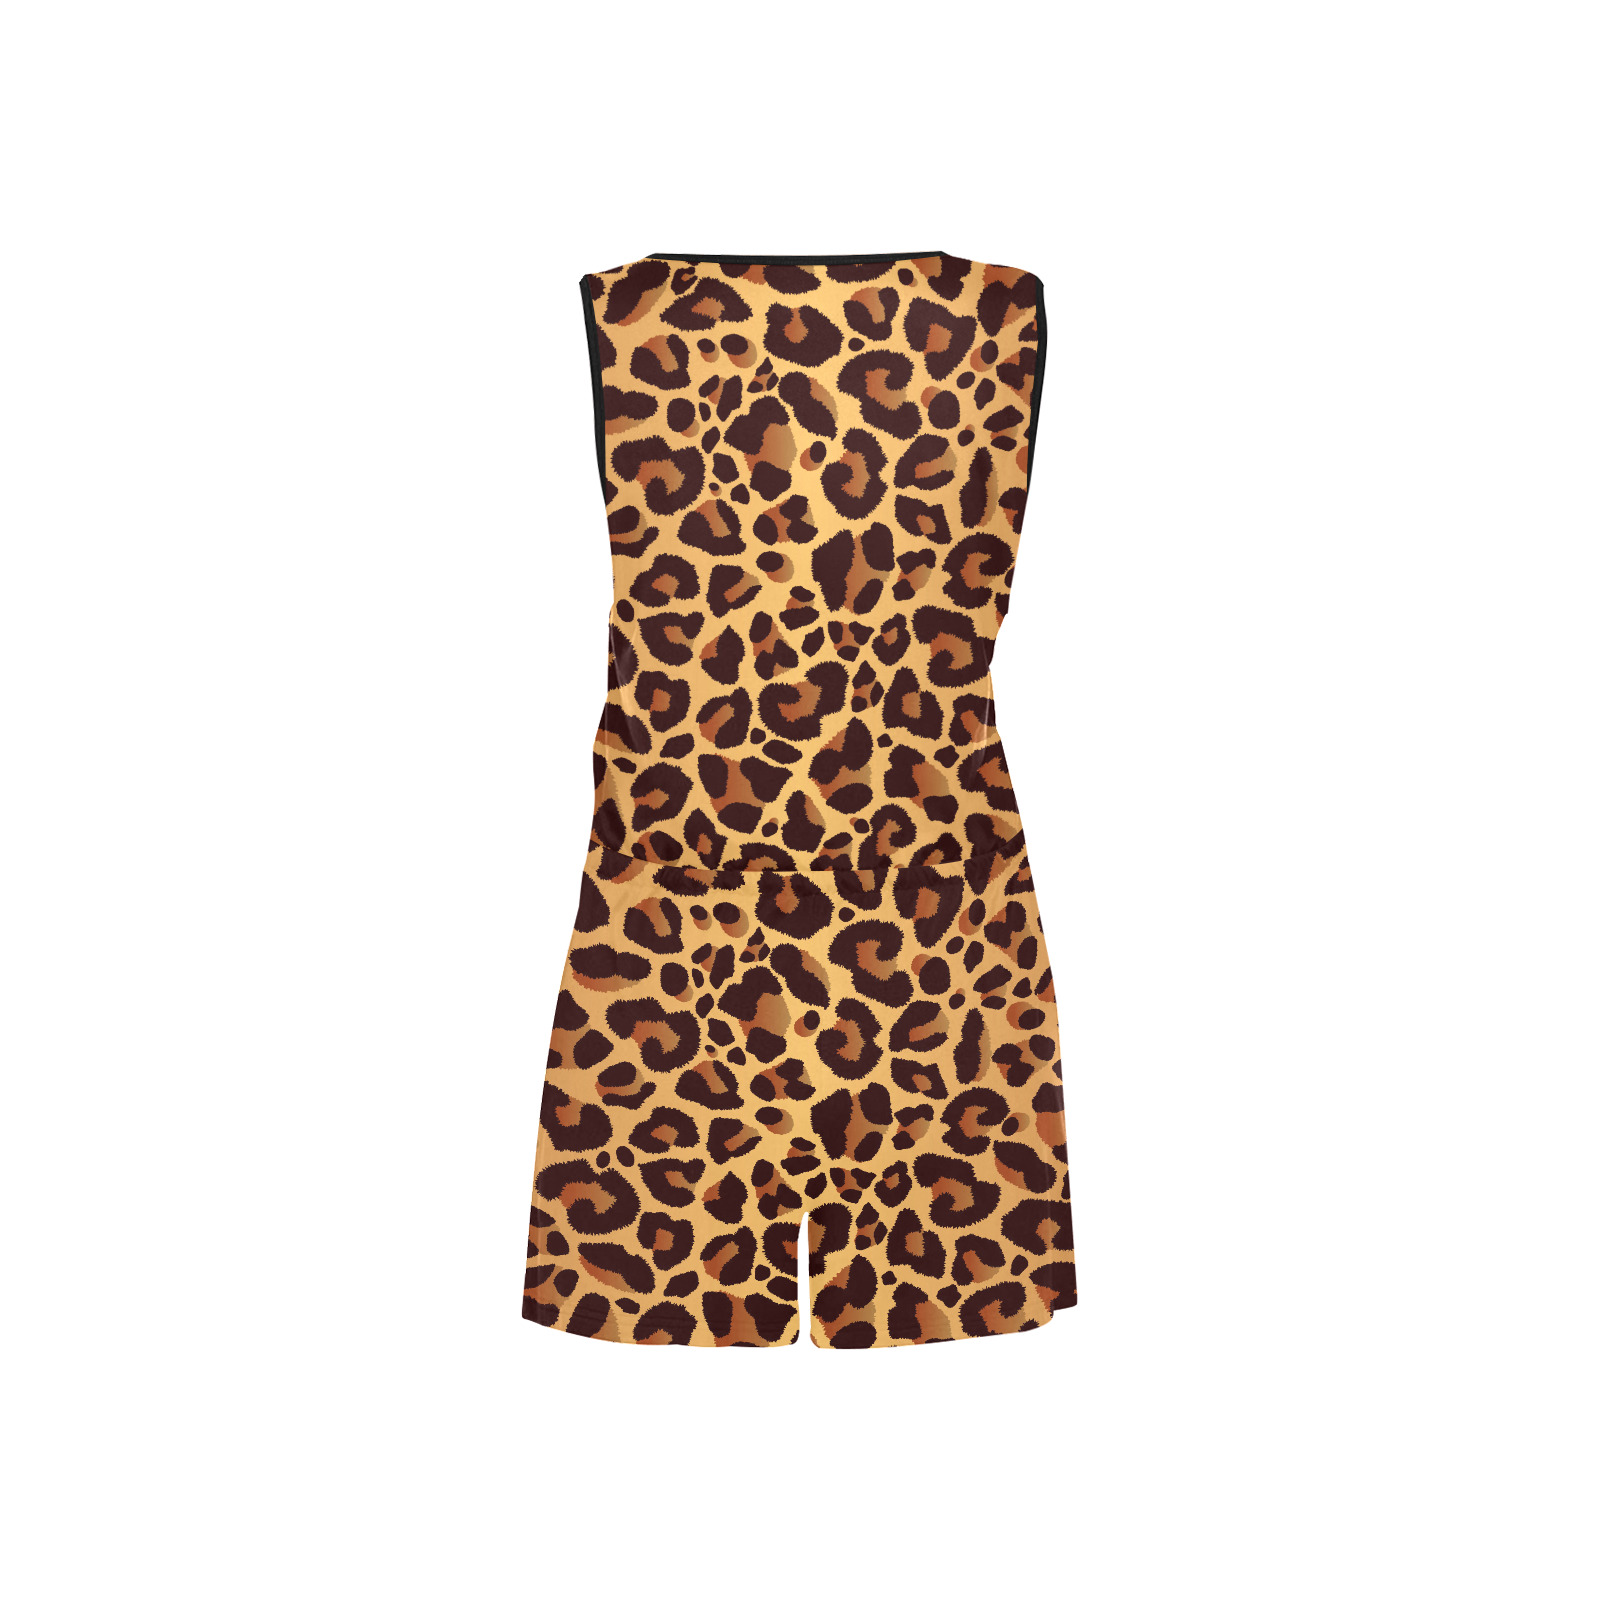 LEOPARD STYLE All Over Print Short Jumpsuit